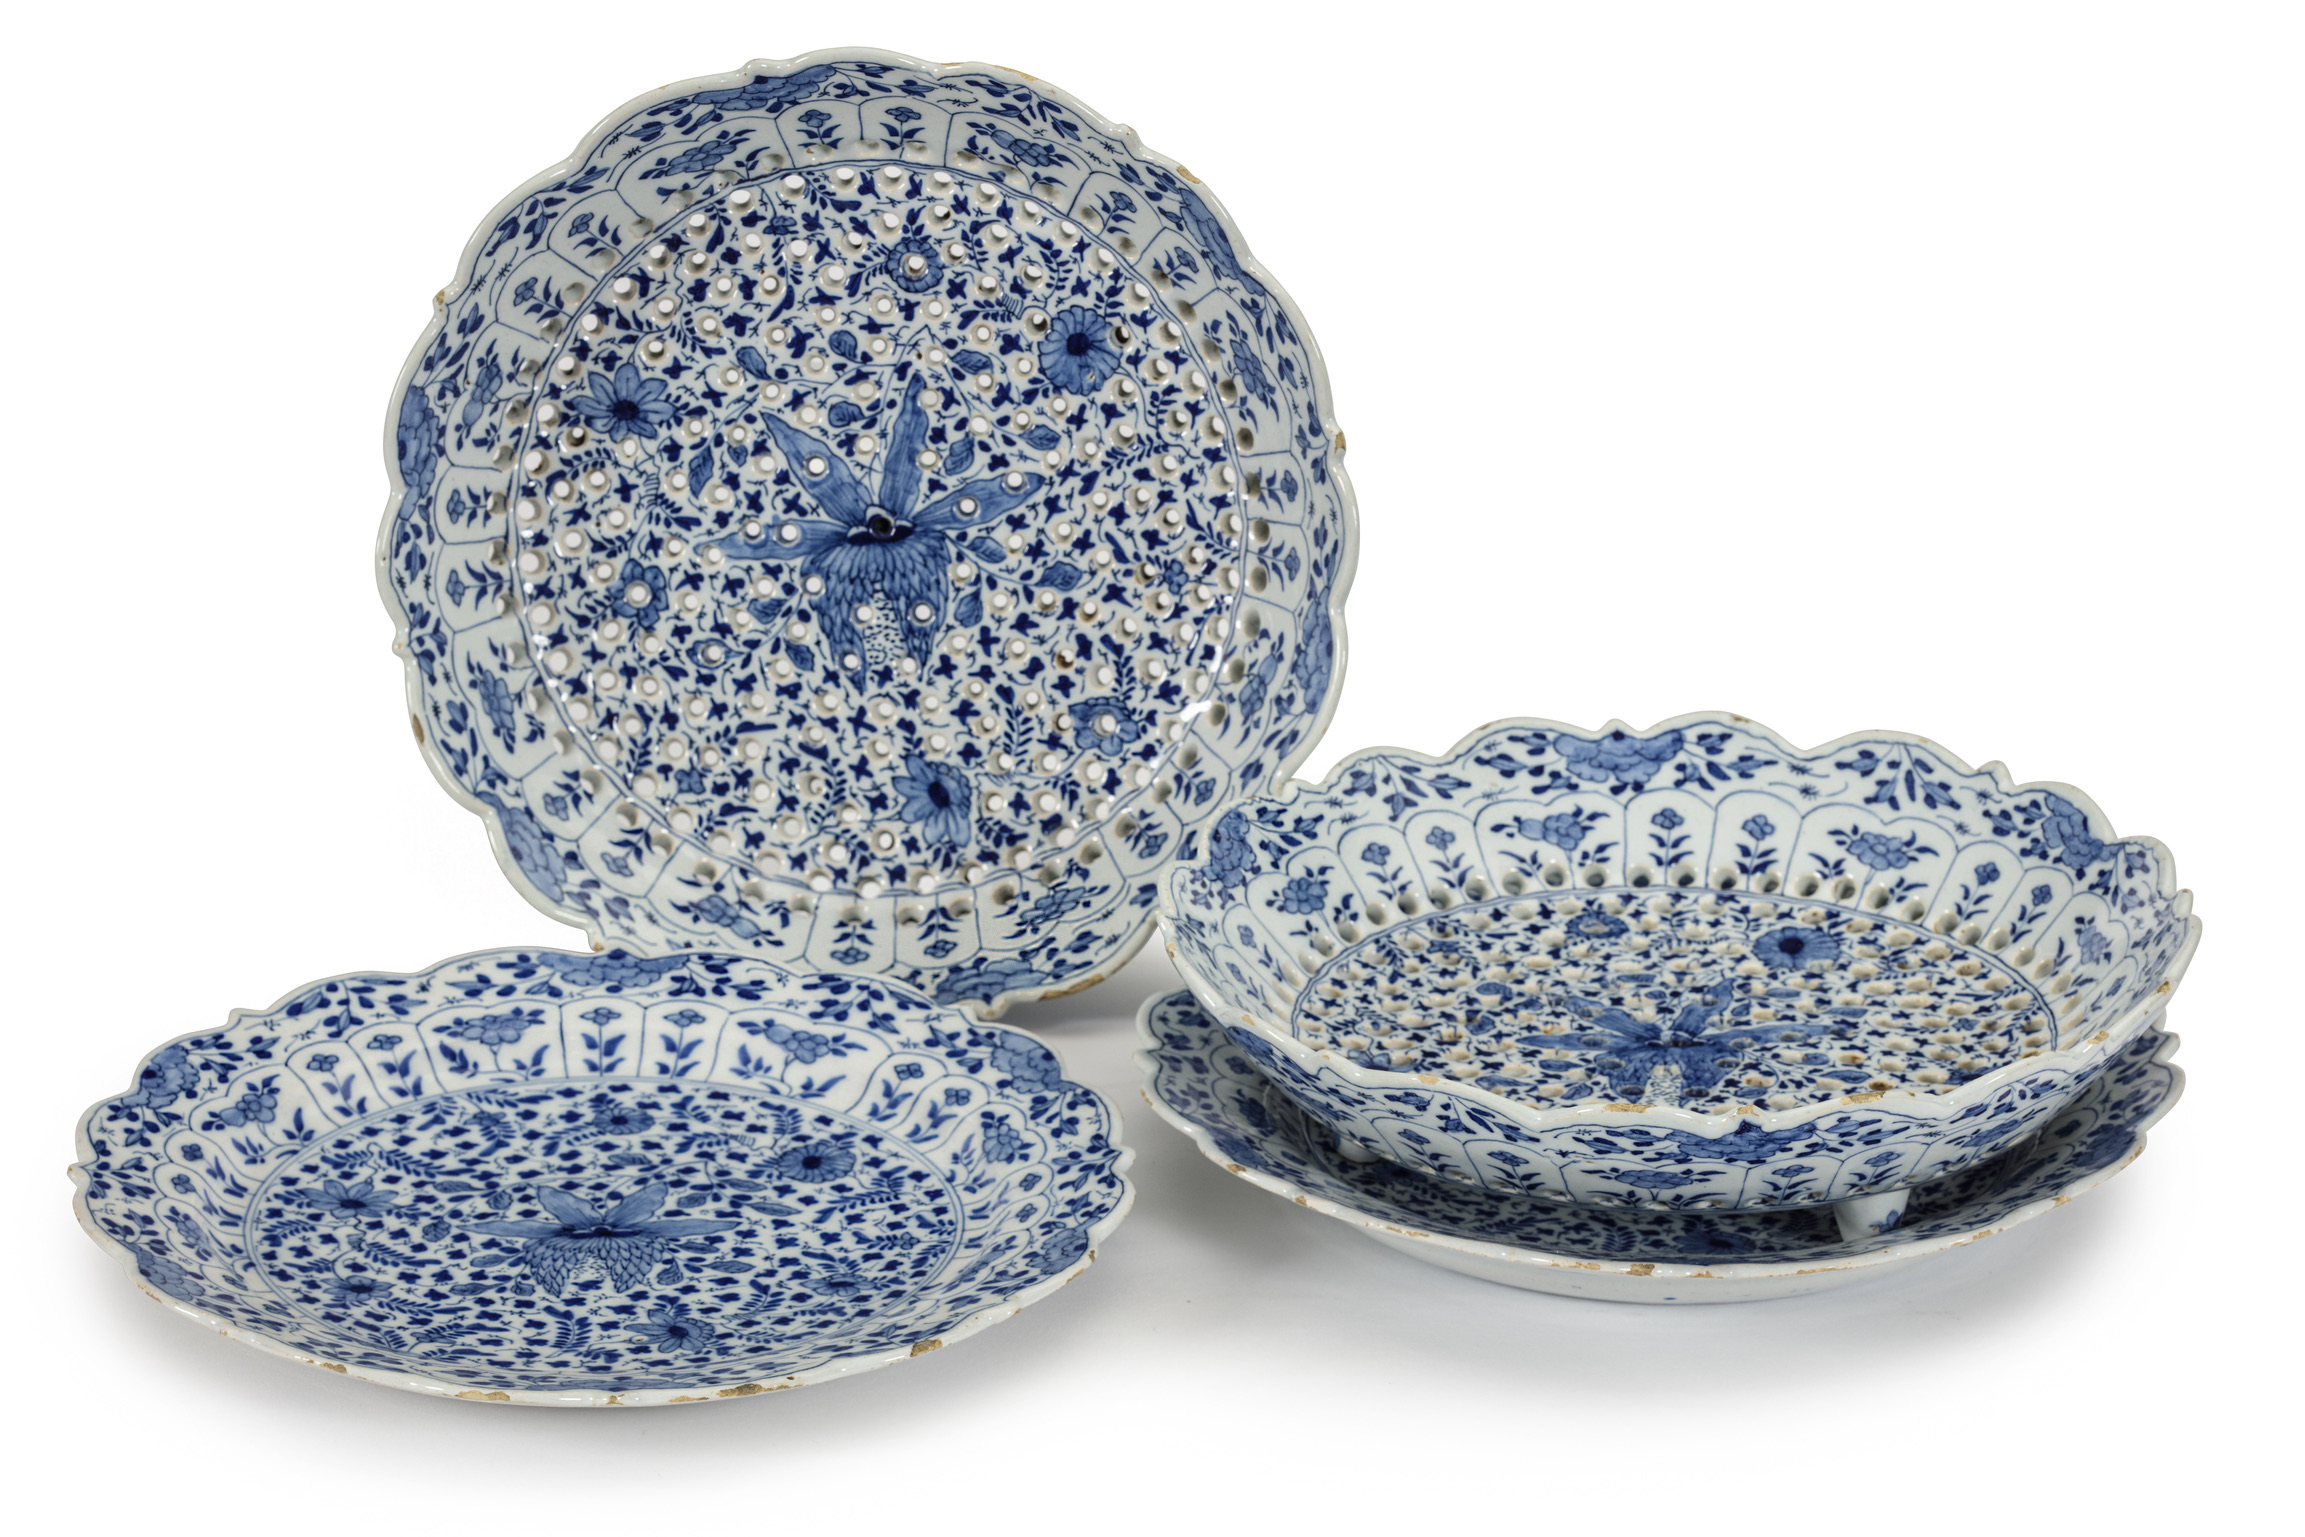 D2343. Pair of Blue and White Reticulated Fruit Strainers and Stands